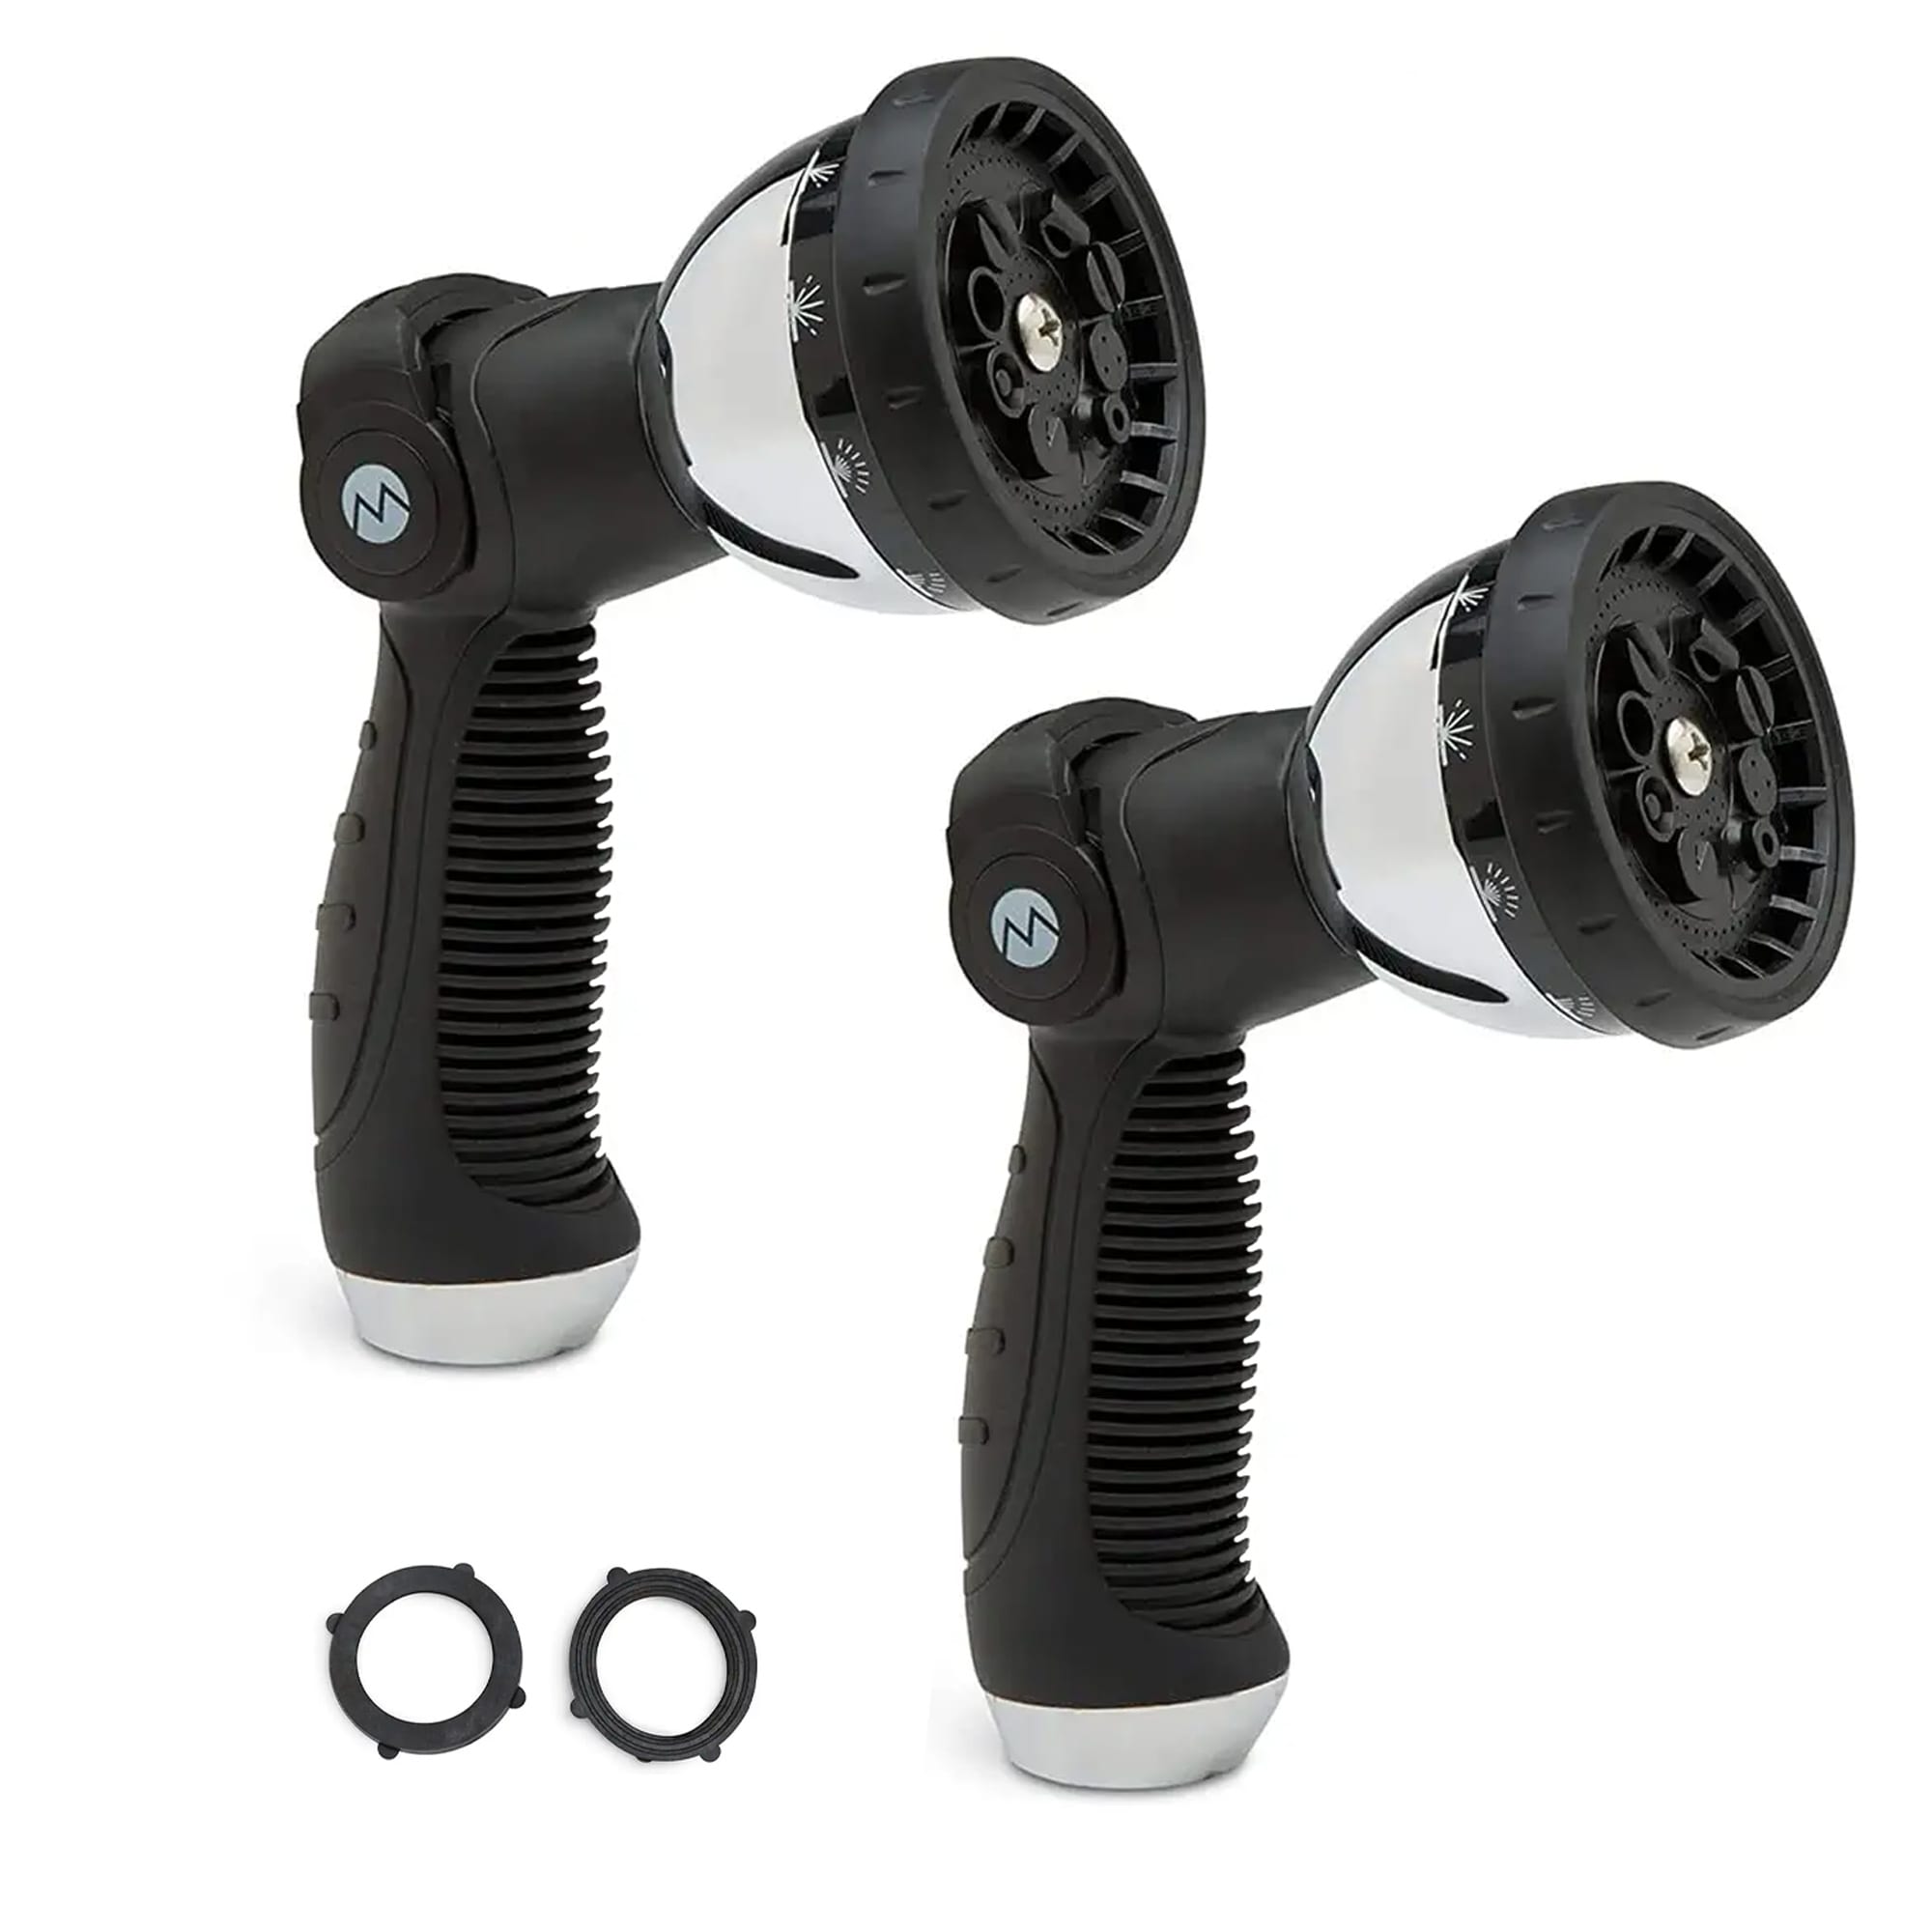 Morvat Water Hose Nozzle Sprayer with 10 Spray Patterns, 2 Pack